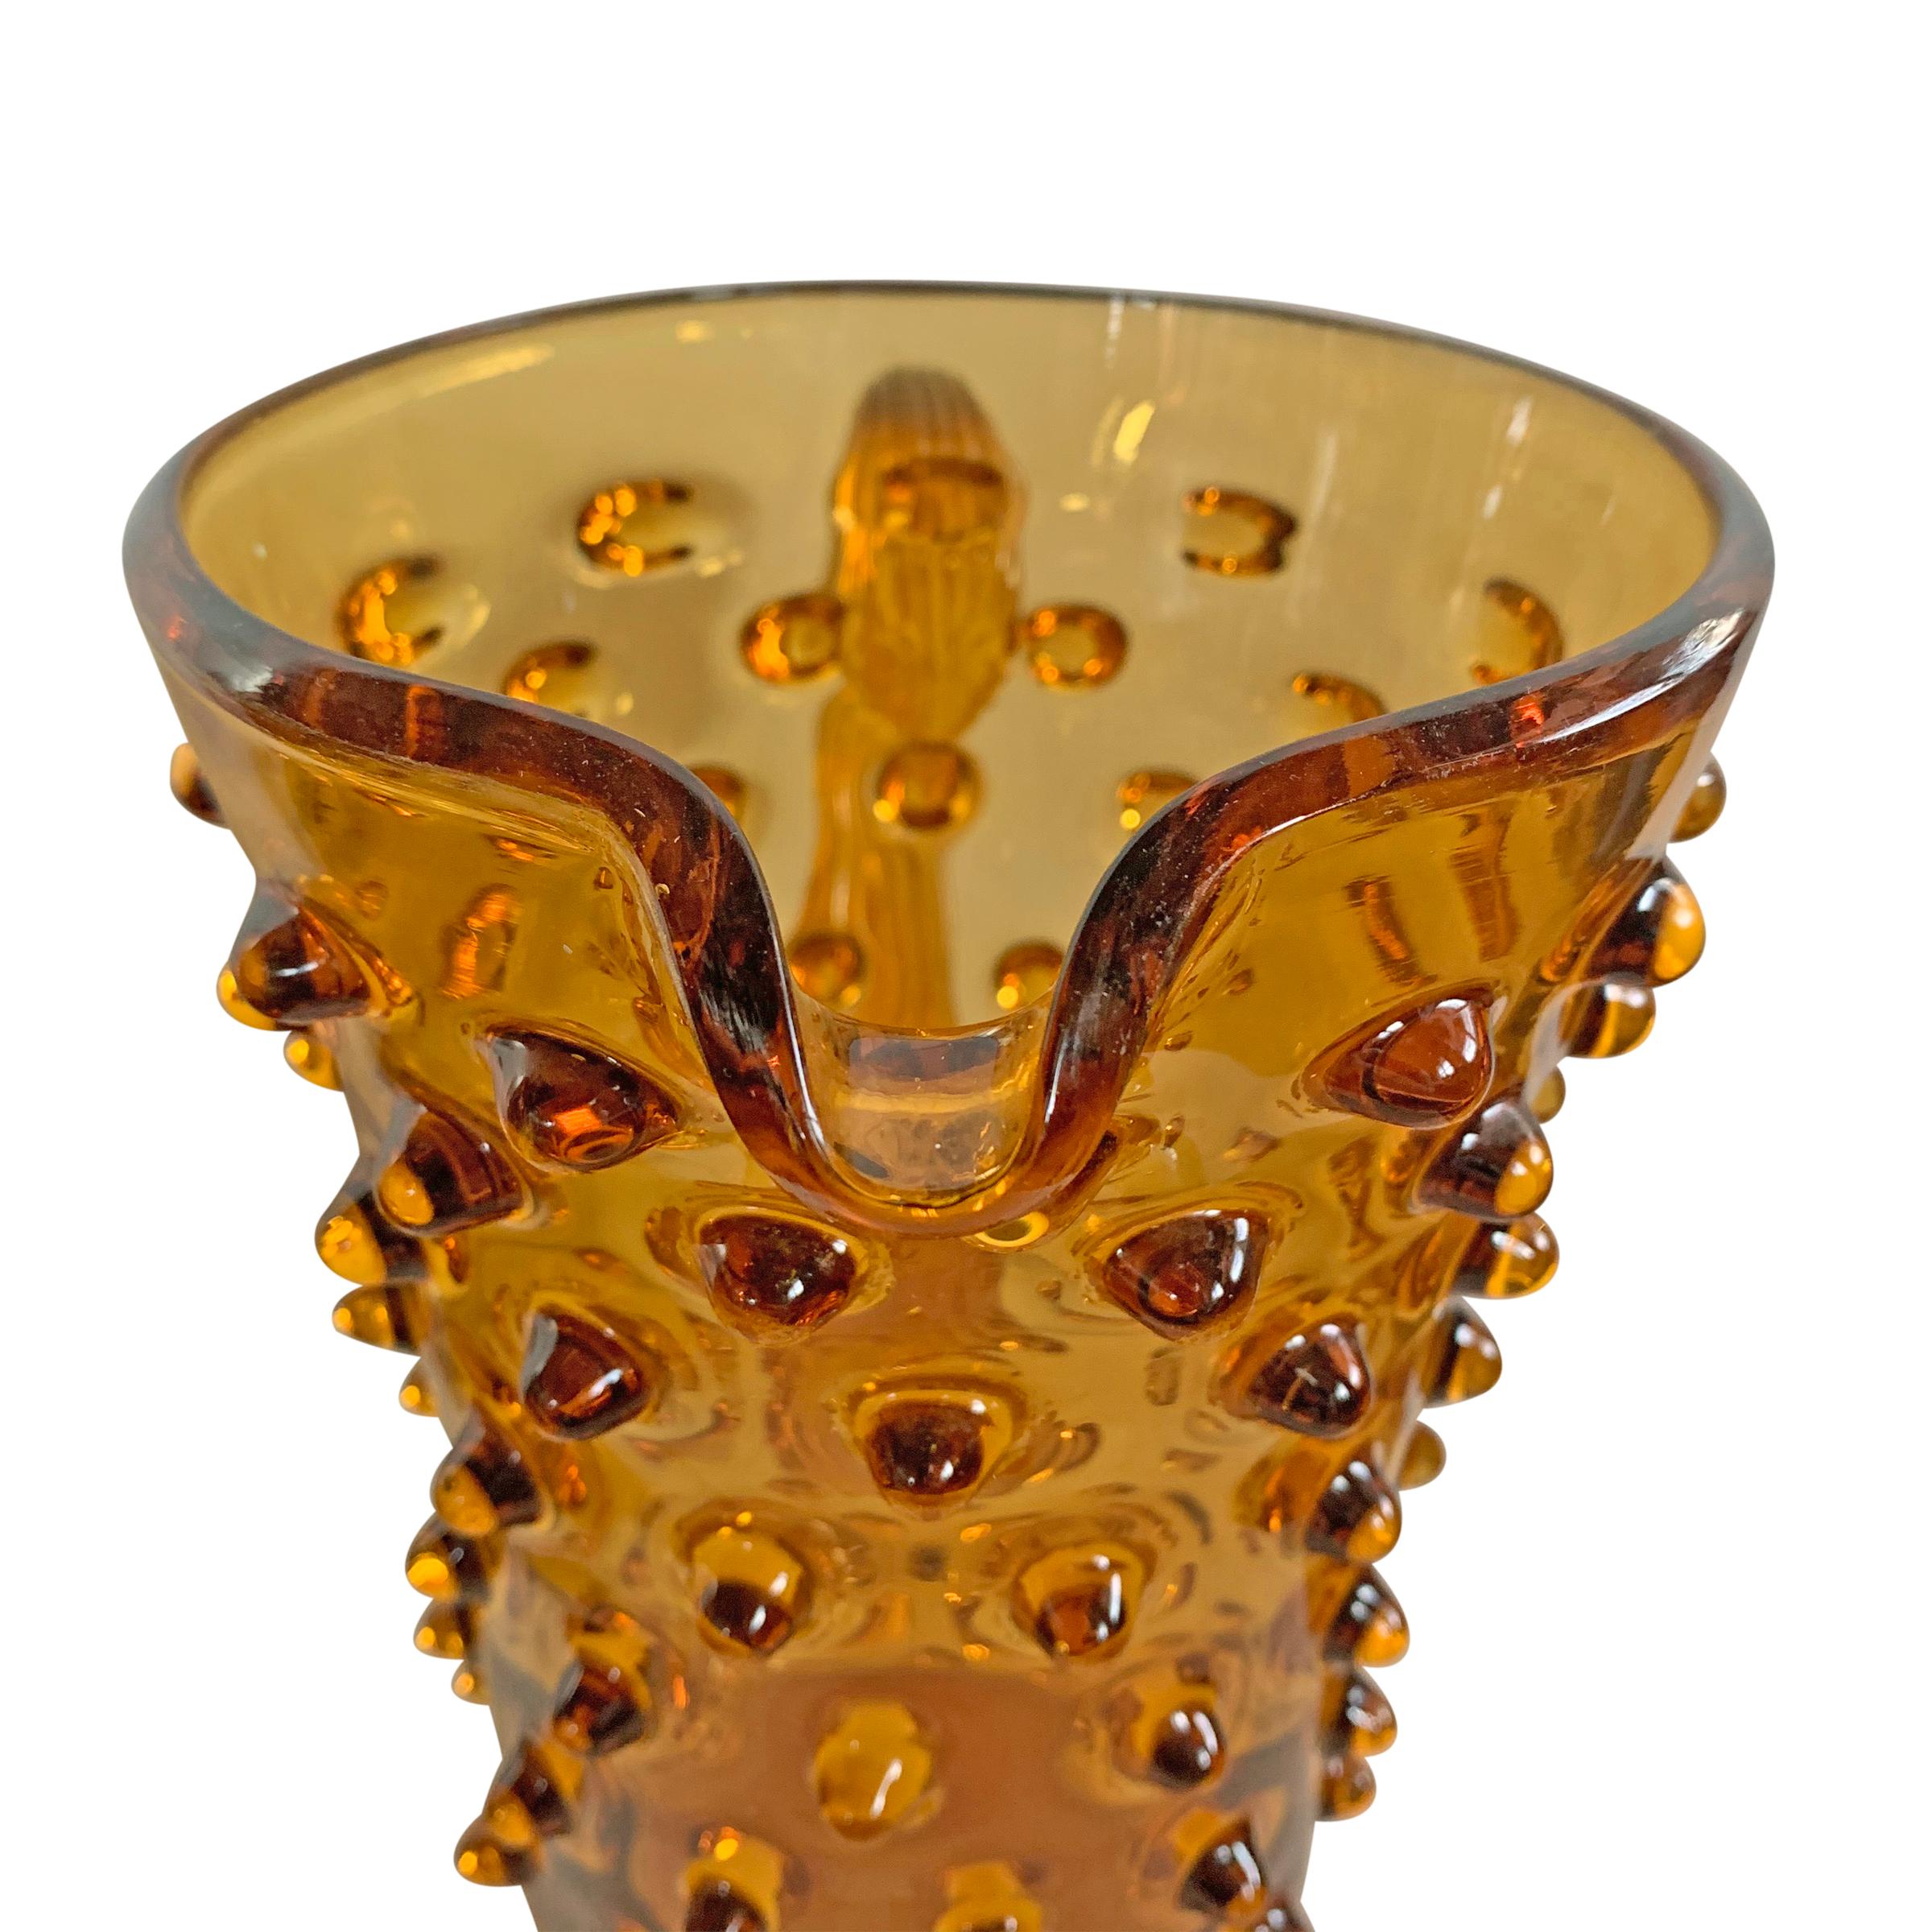 Midcentury American Amber Hobnail Glass Pitcher 2